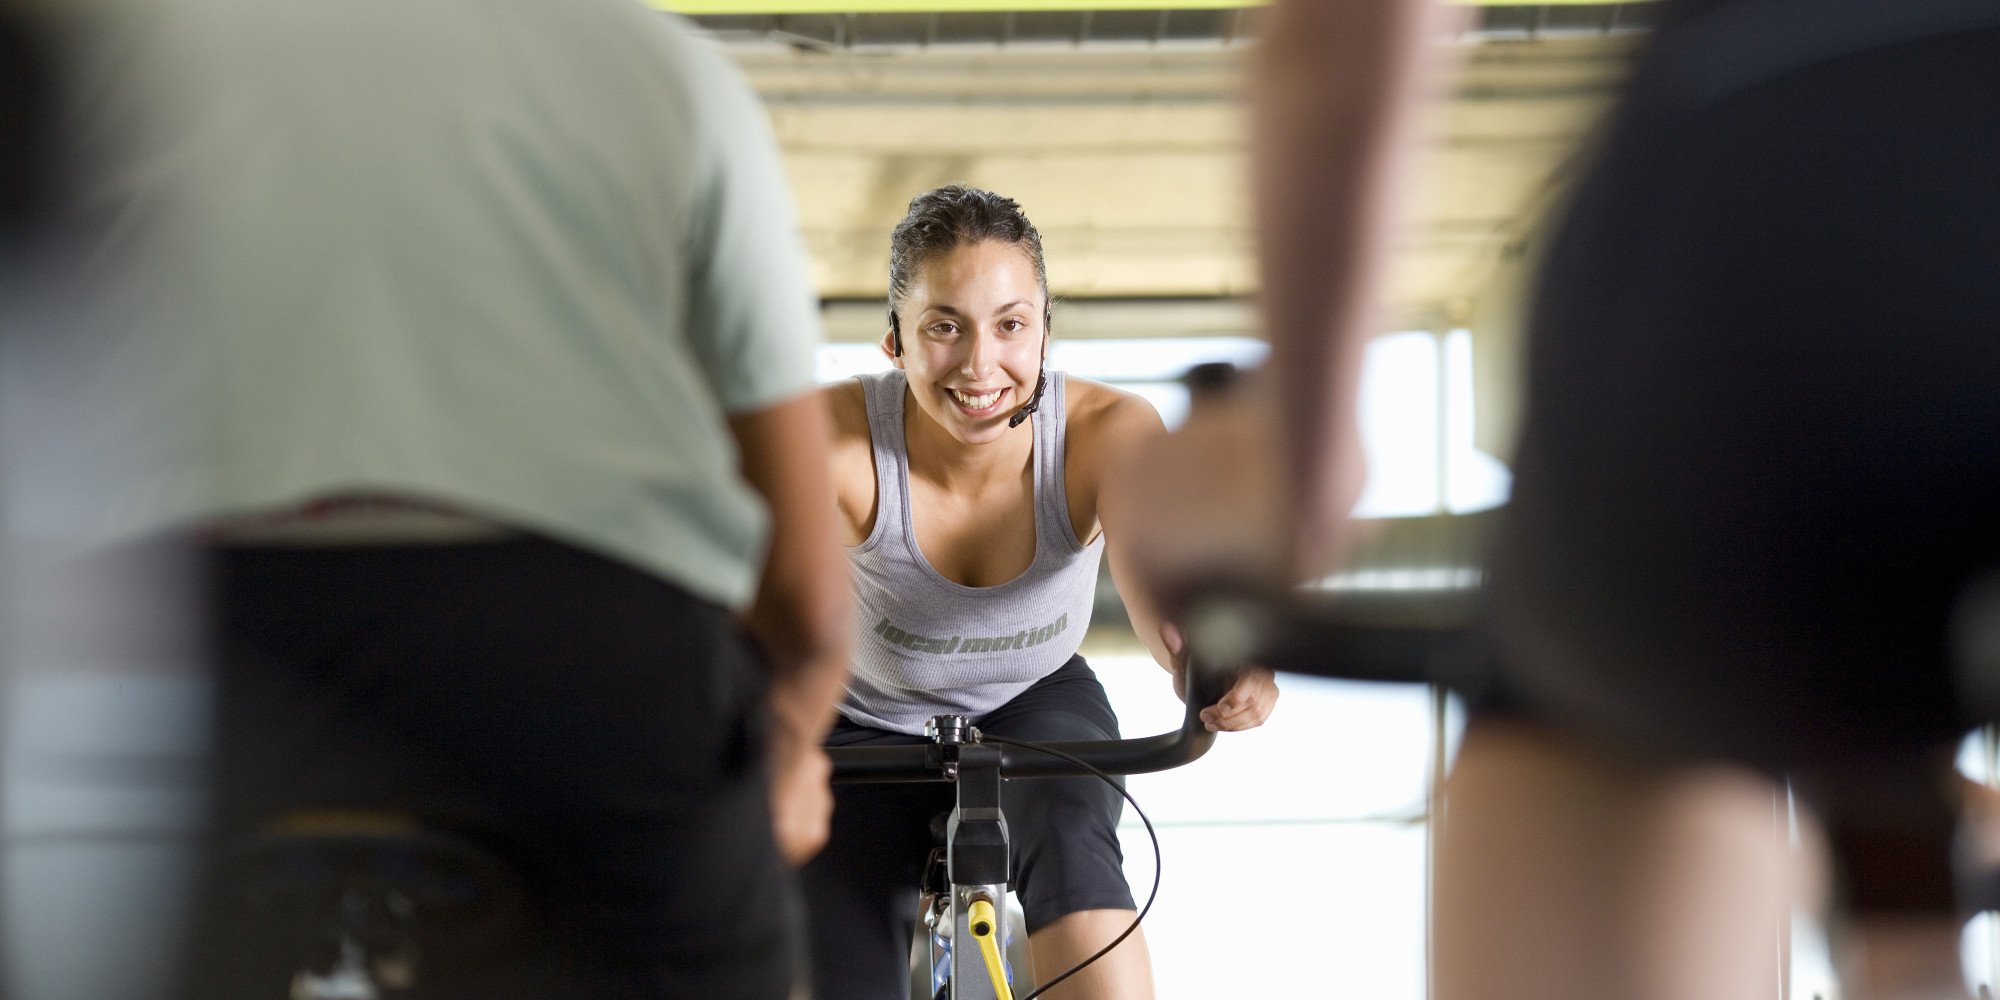 Fitness instructor leading class on exercise bicycles in gym, low angle view